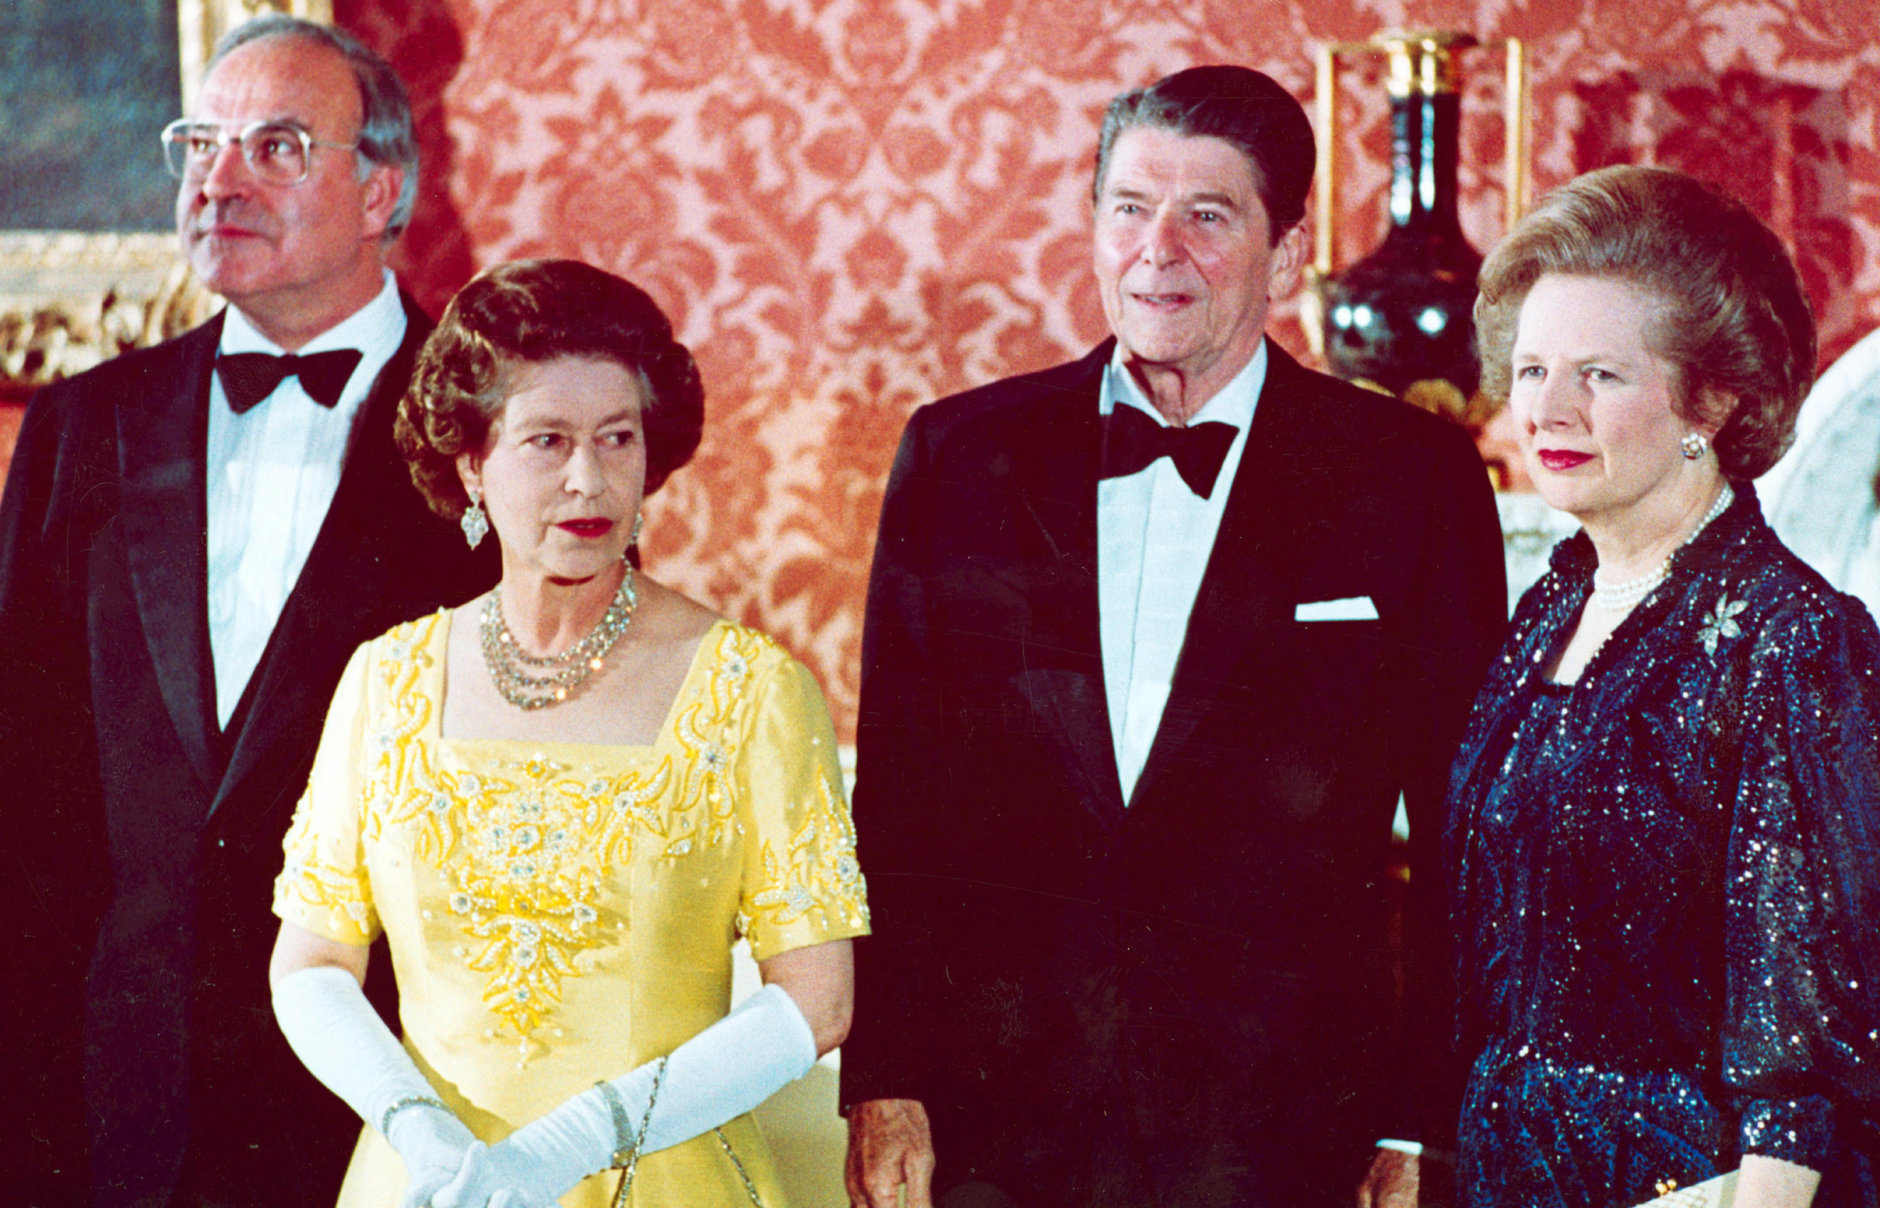 Britain's Queen Elizabeth II, second left, stands with, West German Chancellor Helmut Kohl, left, U.S. President Ronald Reagan, second right, and Britain's Prime Minister Margaret Thatcher at London's Buckingham Palace, prior to a dinner for summit leaders, June 10, 1984.  (AP Photo)